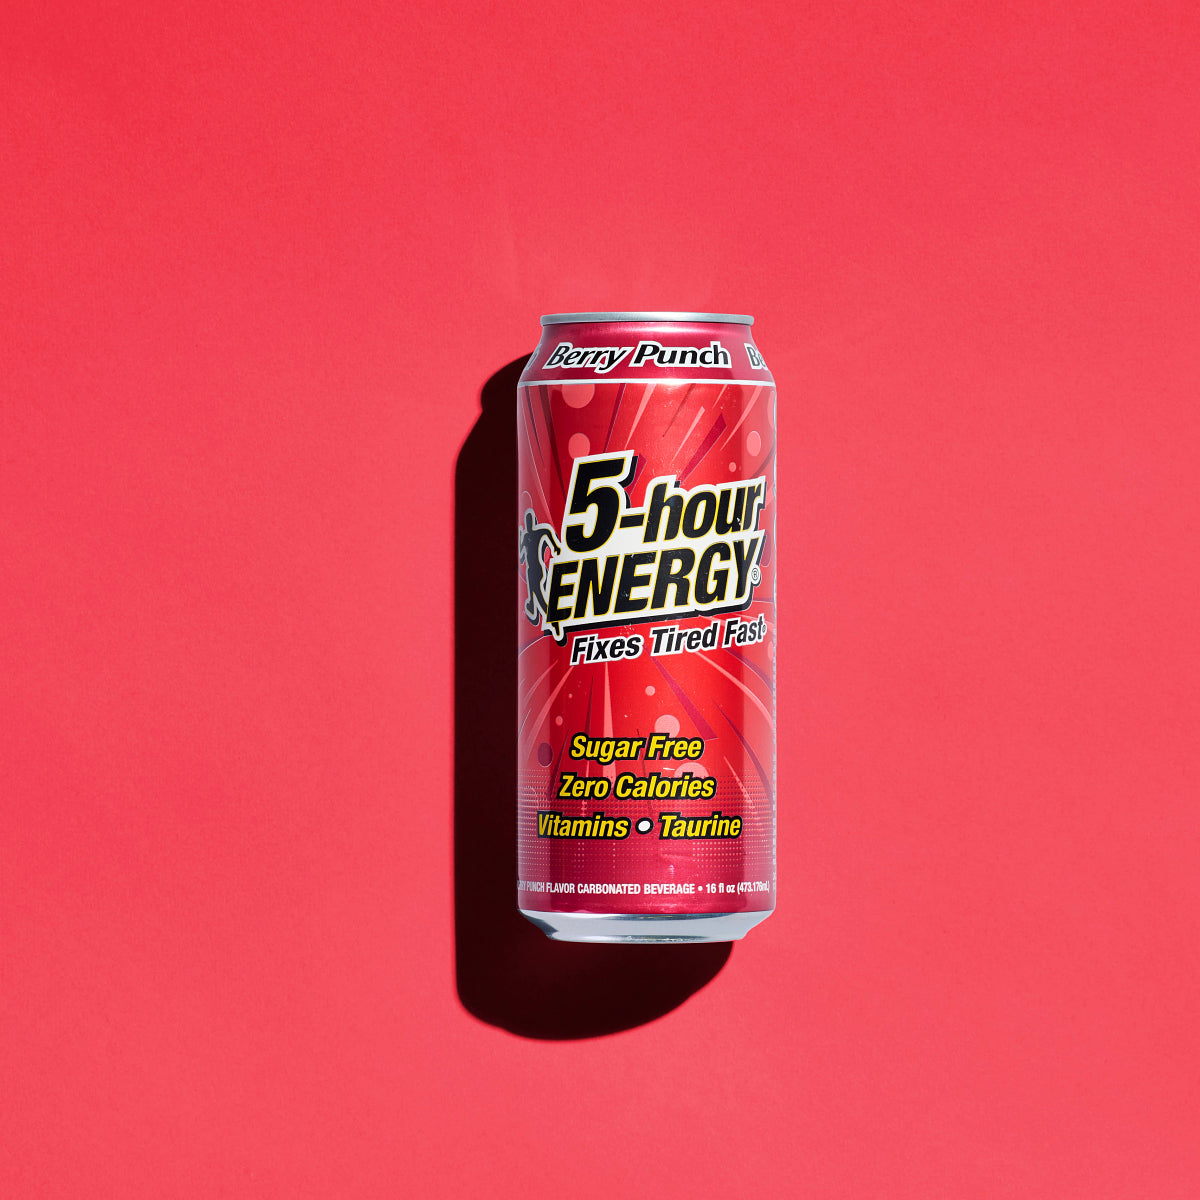 Individual can of 5-hour ENERGY Berry Punch